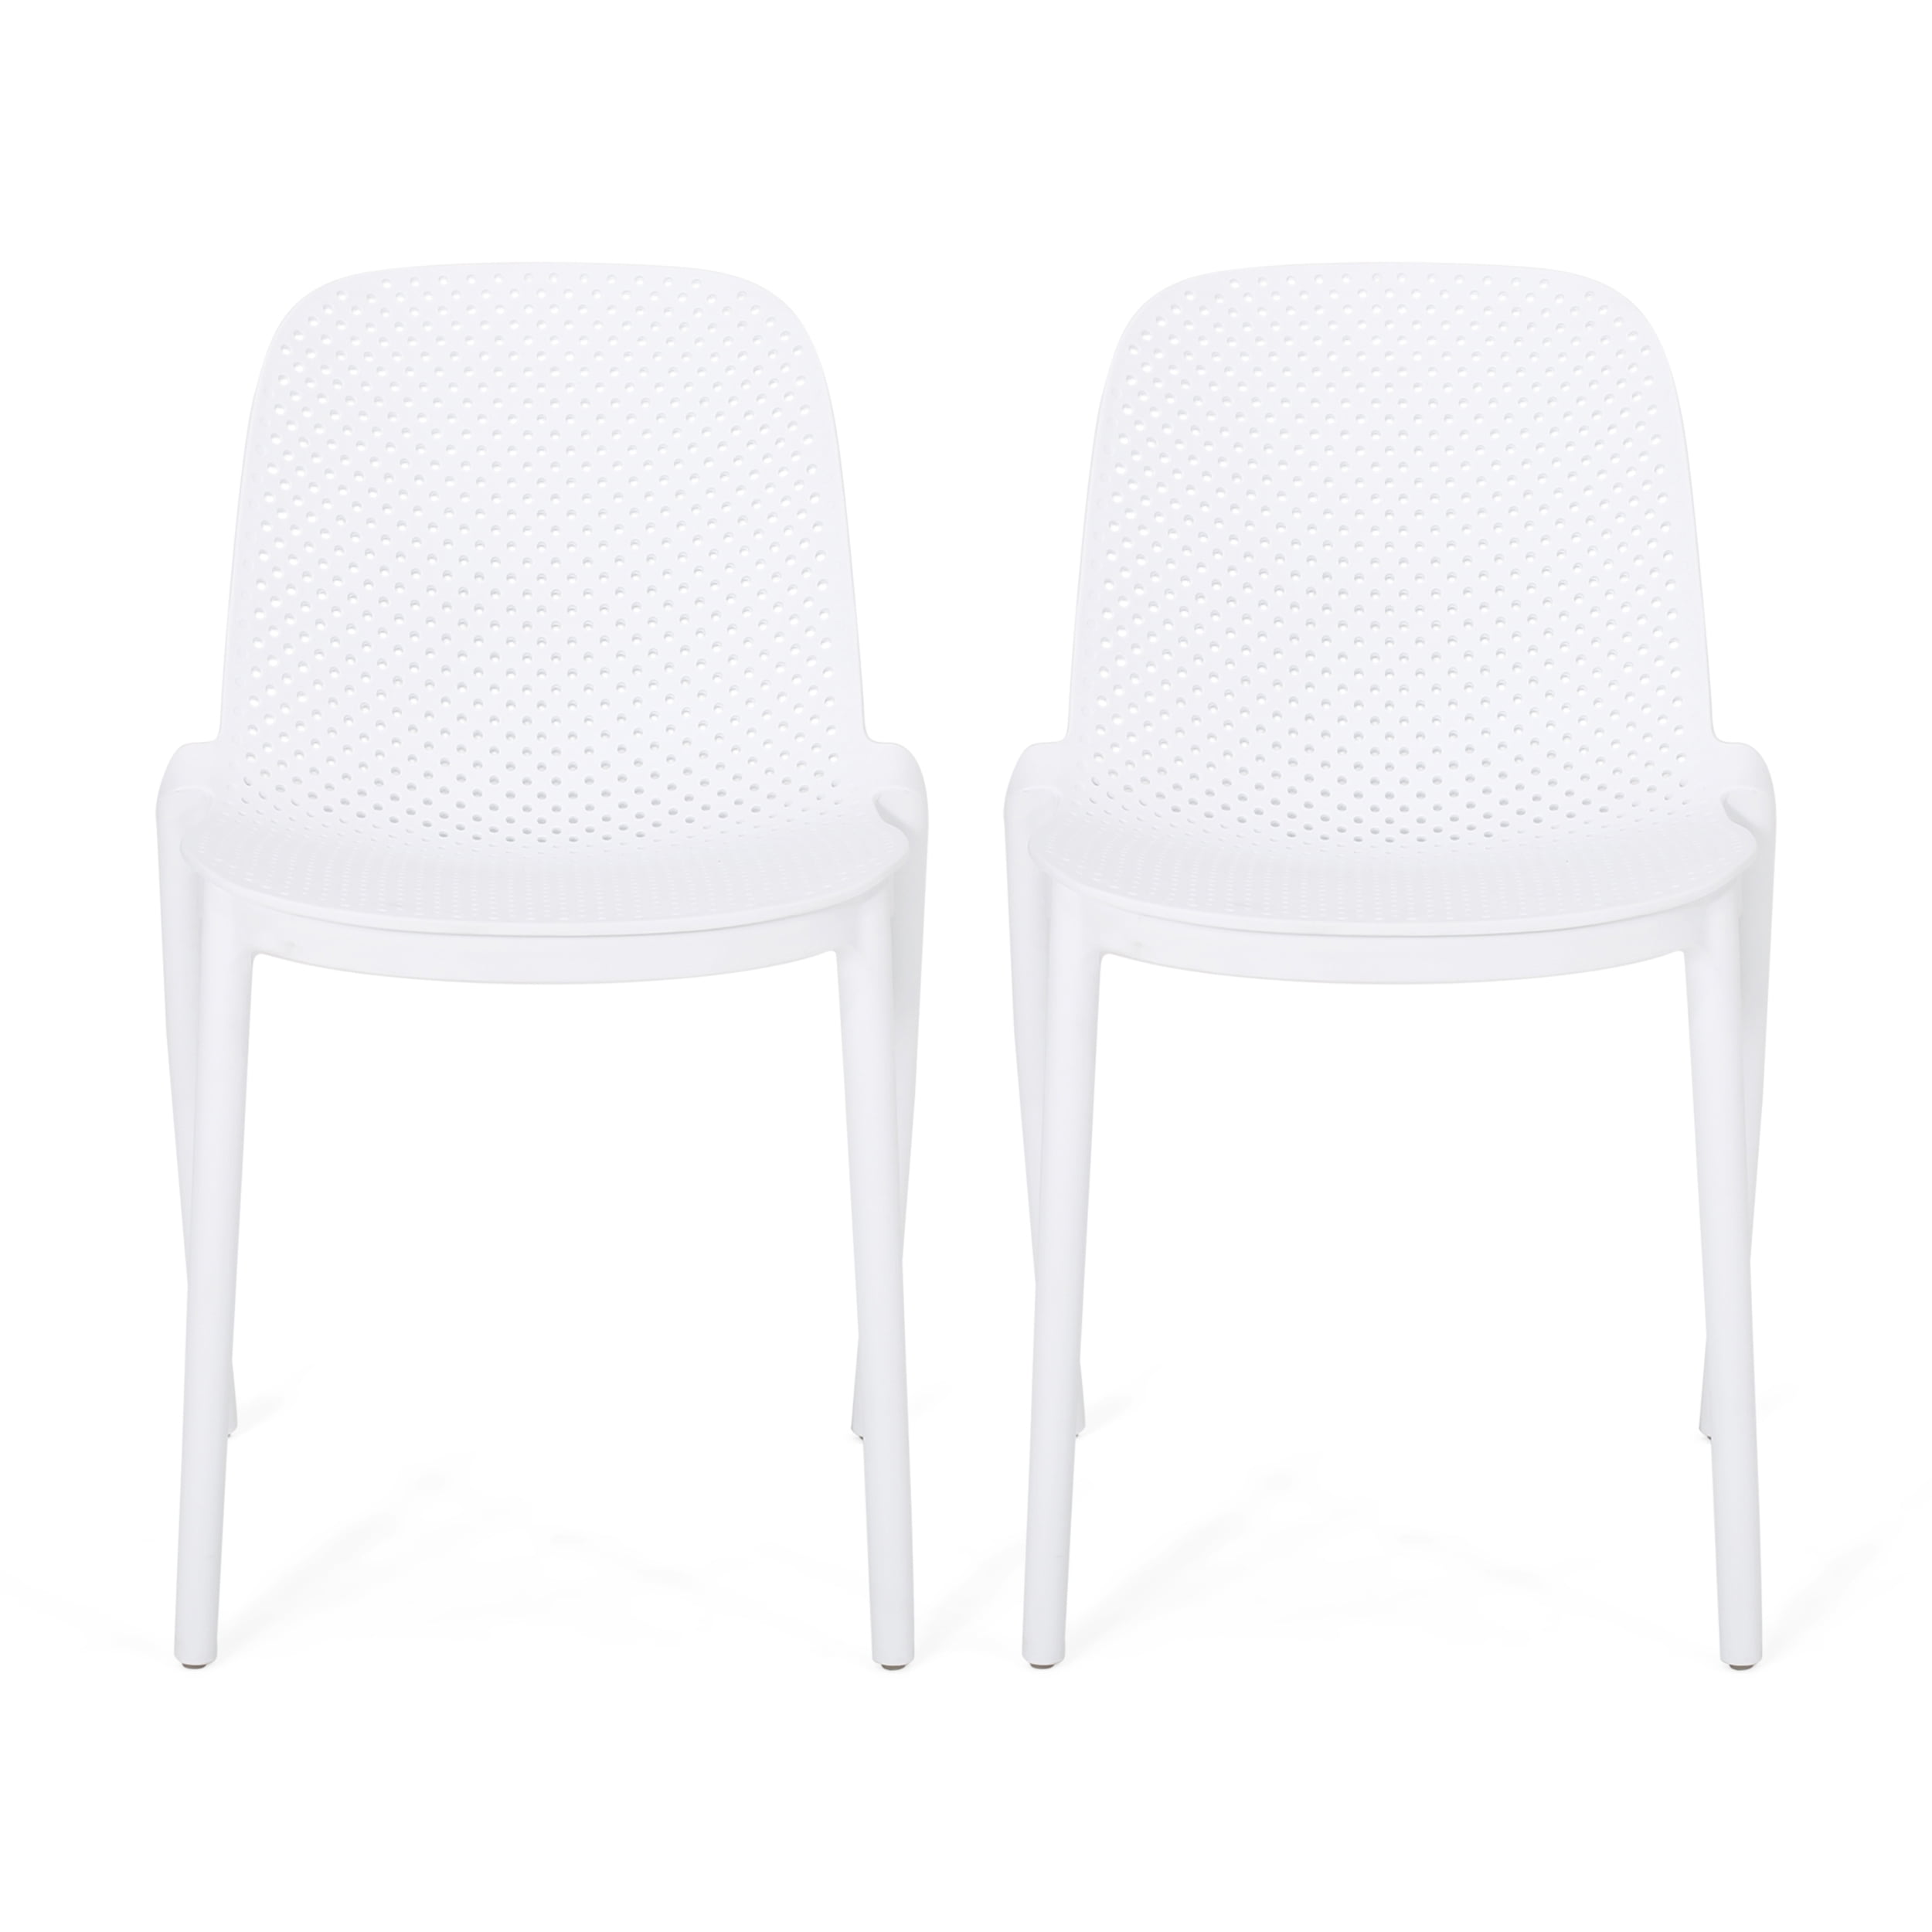 GDFStudio Ernie Outdoor Plastic Nylon Dining Chairs Set of 2, French White